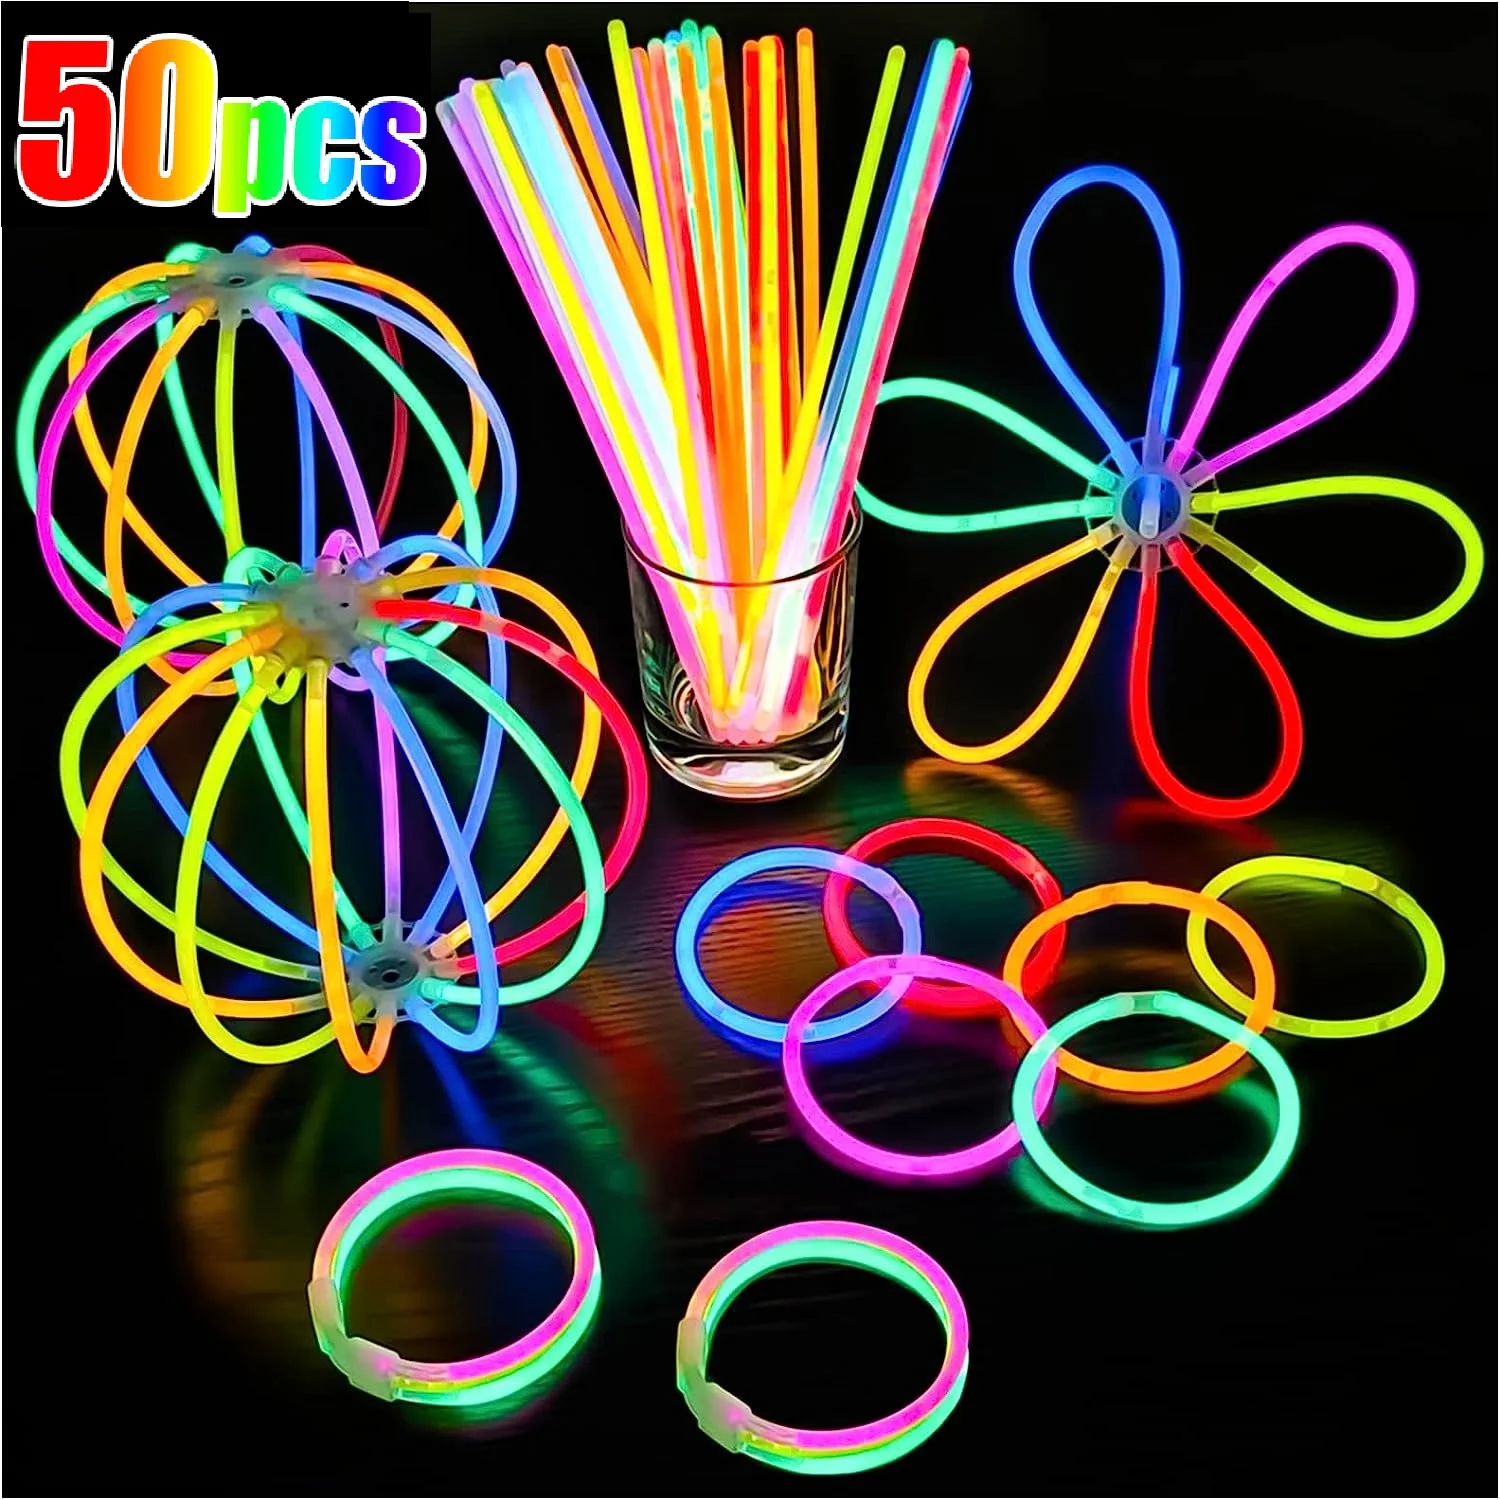 

Party Glow Sticks Fluorescence Light Glow In The Dark Bracelets Necklace Bright Colorful Glowing Stick Birthday Party Decor Prop